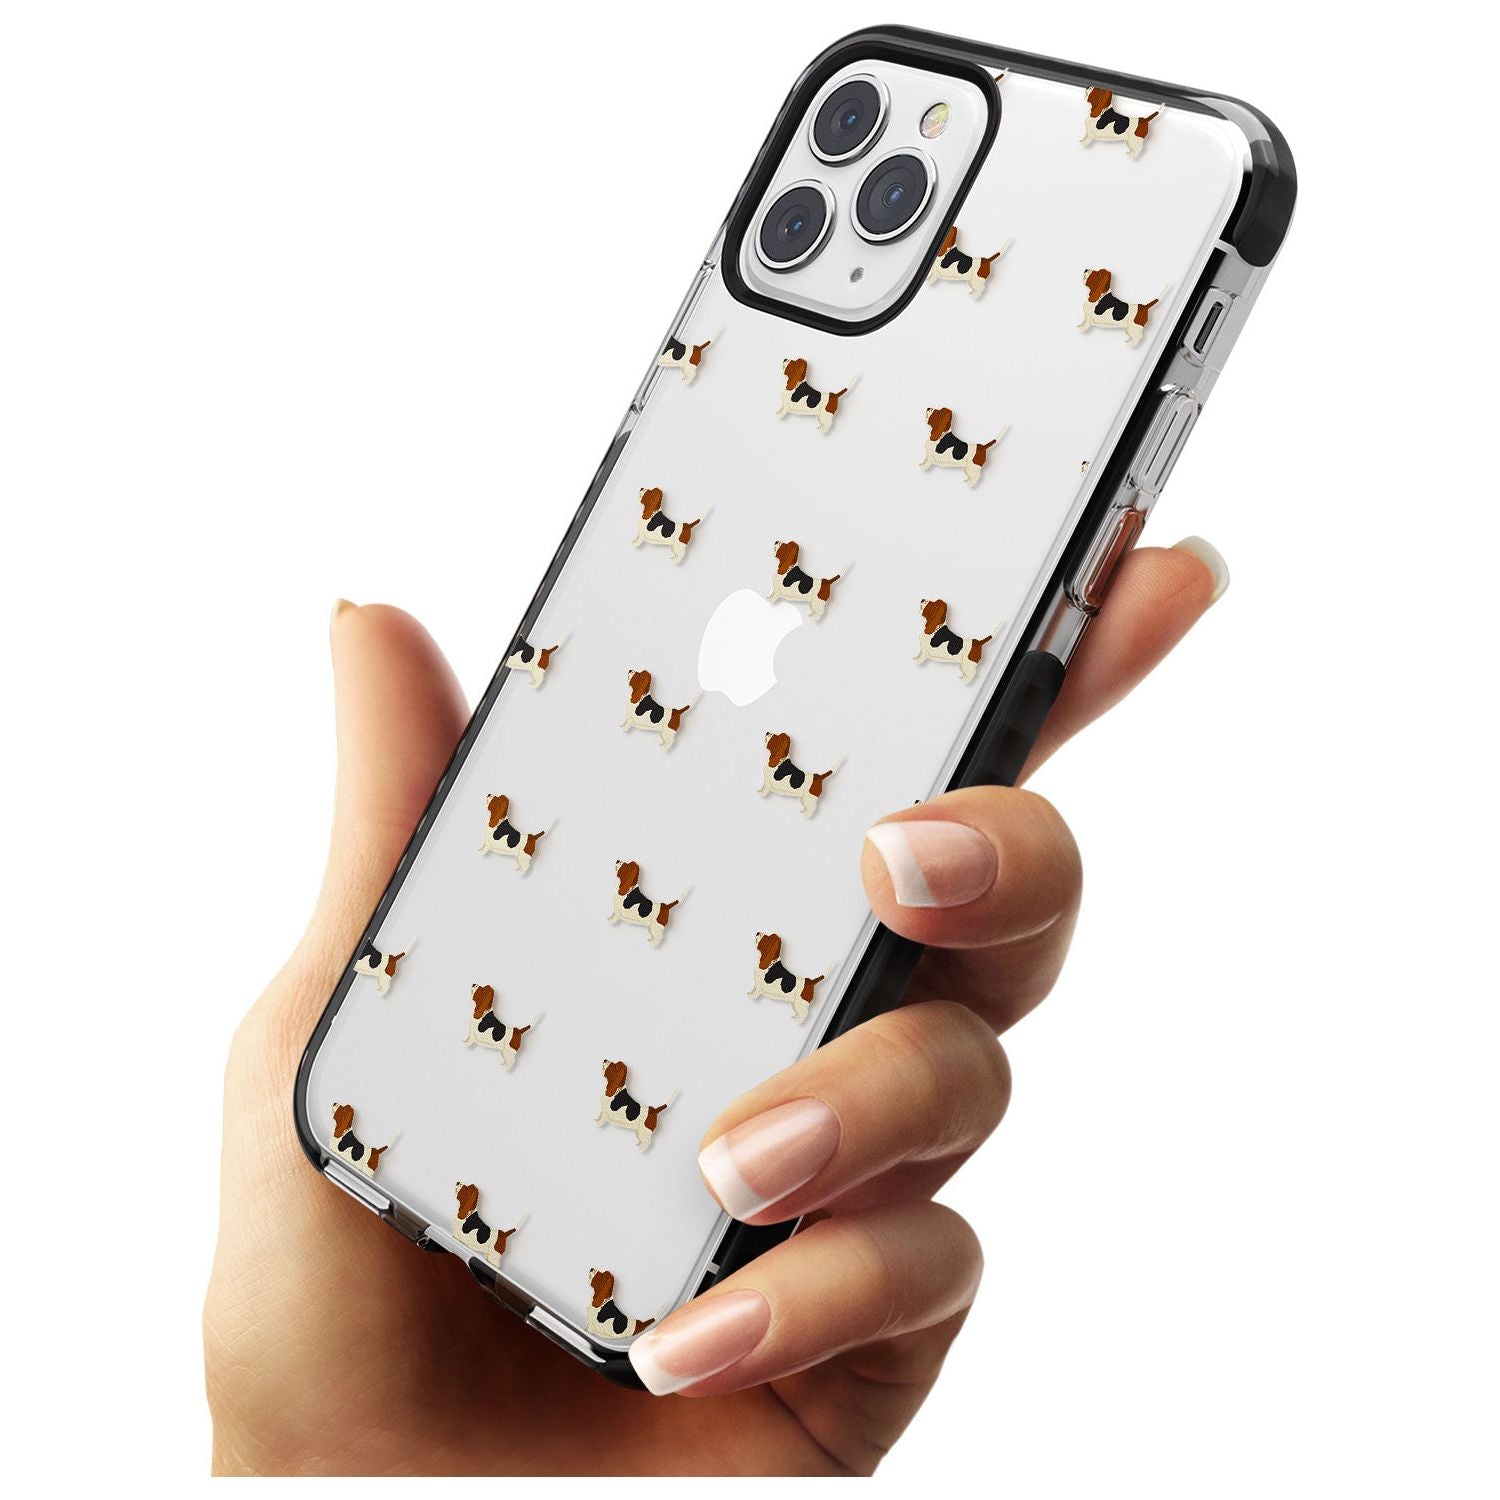 . Basset Hound Dog Pattern Clear Black Impact Phone Case for iPhone 11 Pro Max